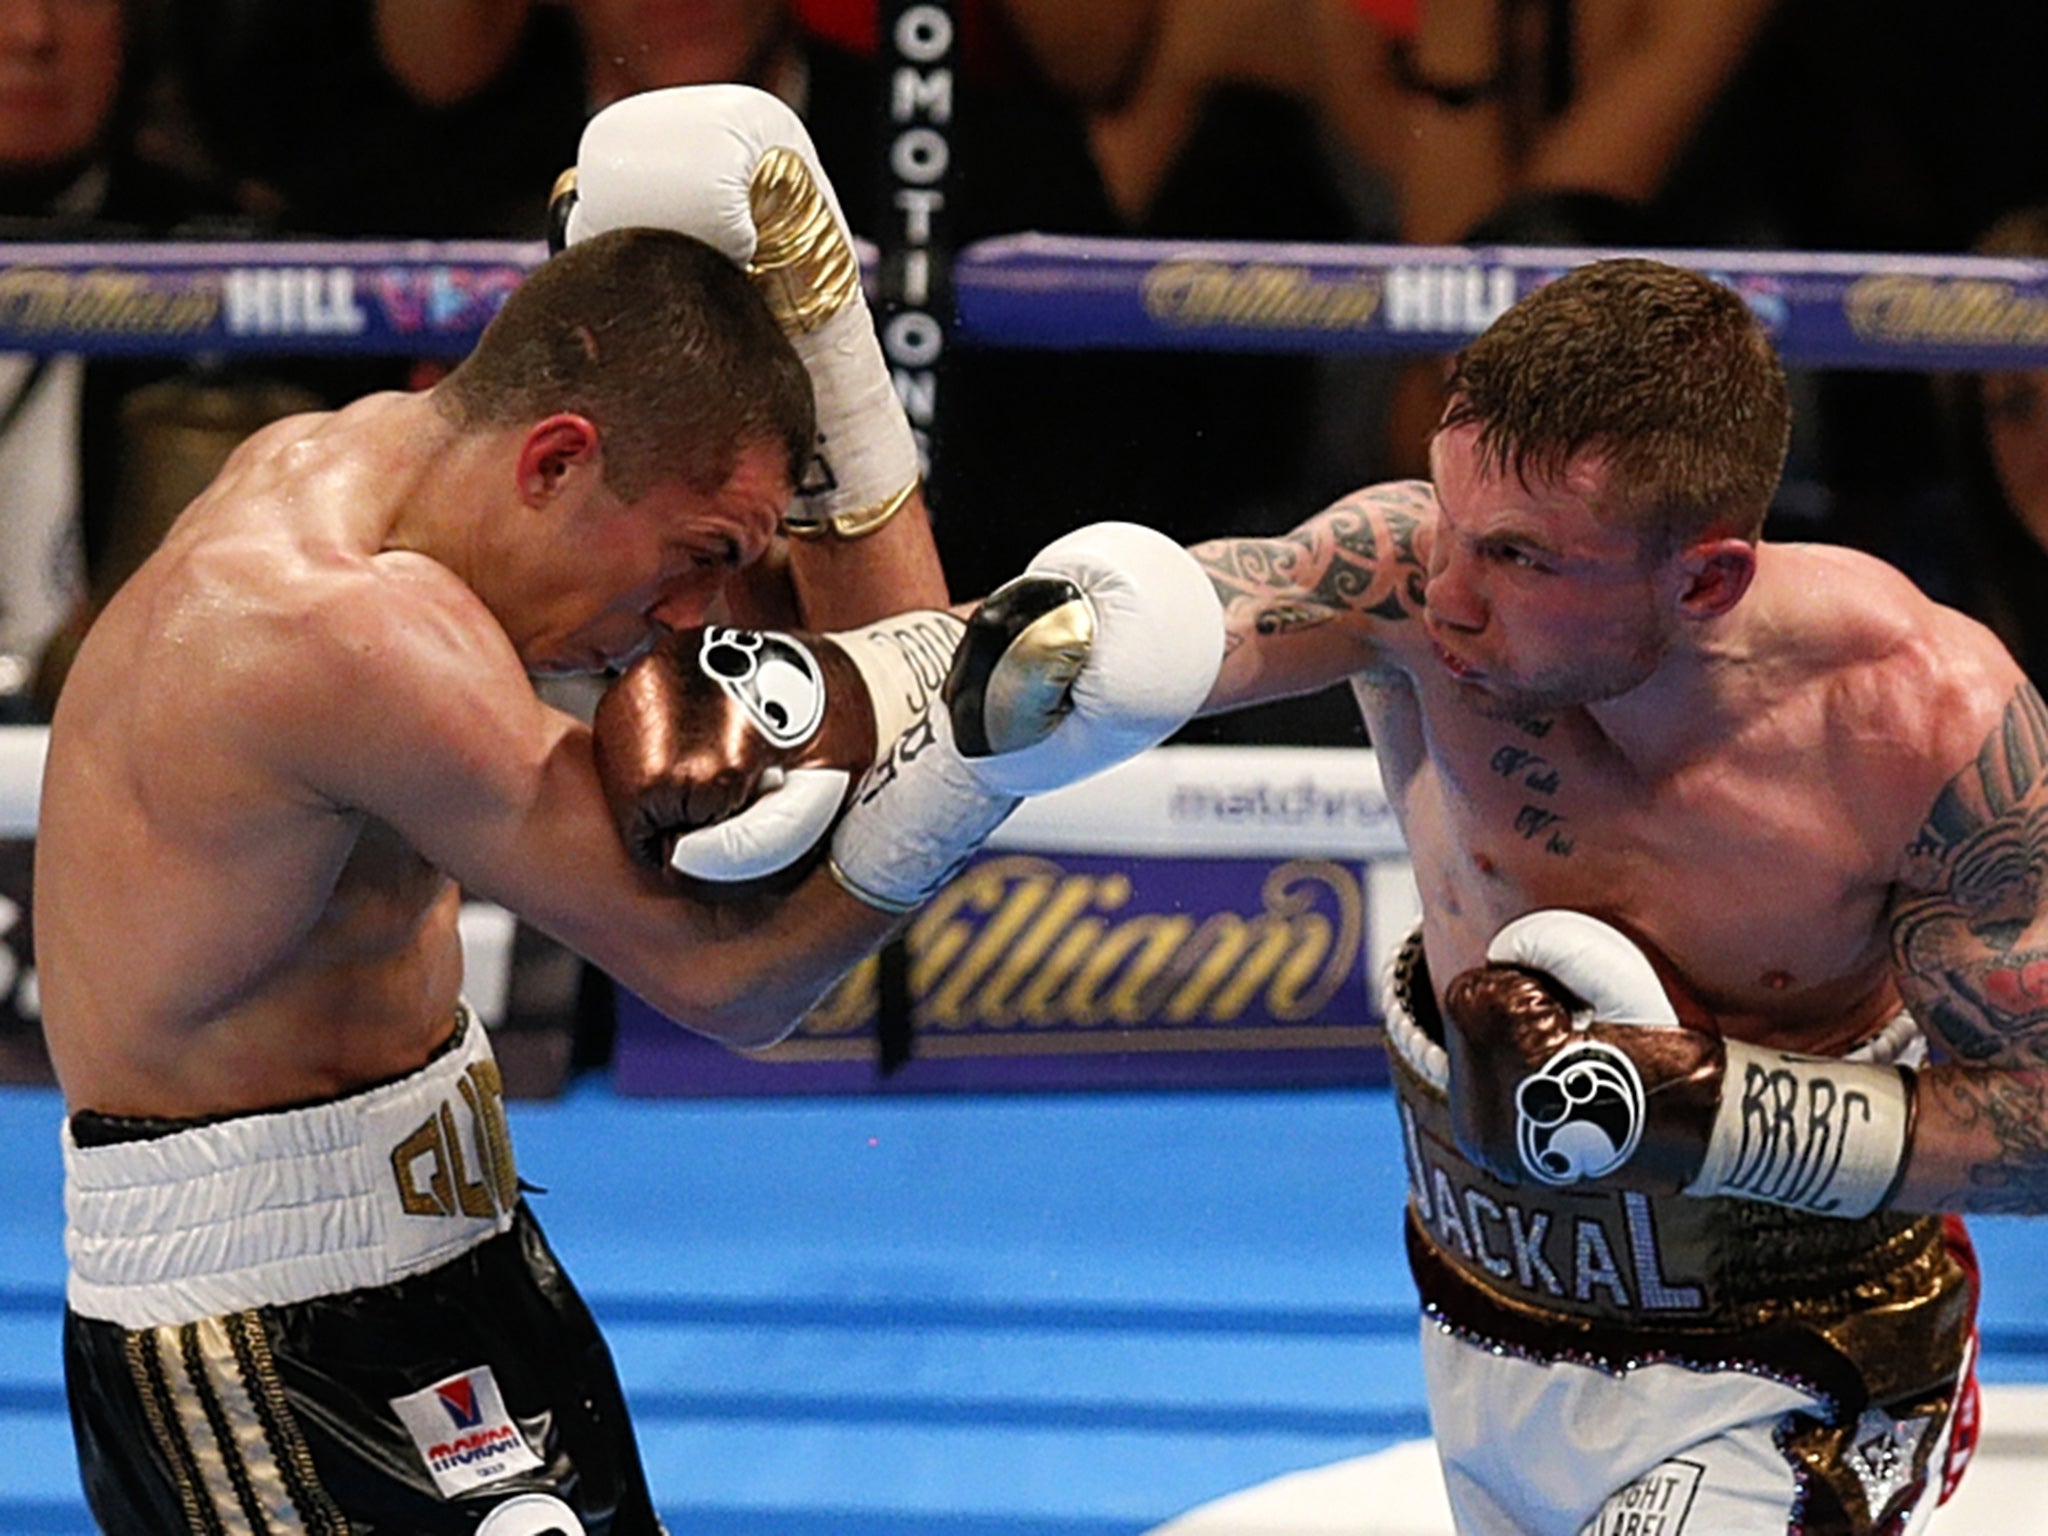 Scott Quigg takes another blow from Carl Frampton in an abject world title defeat in Manchester